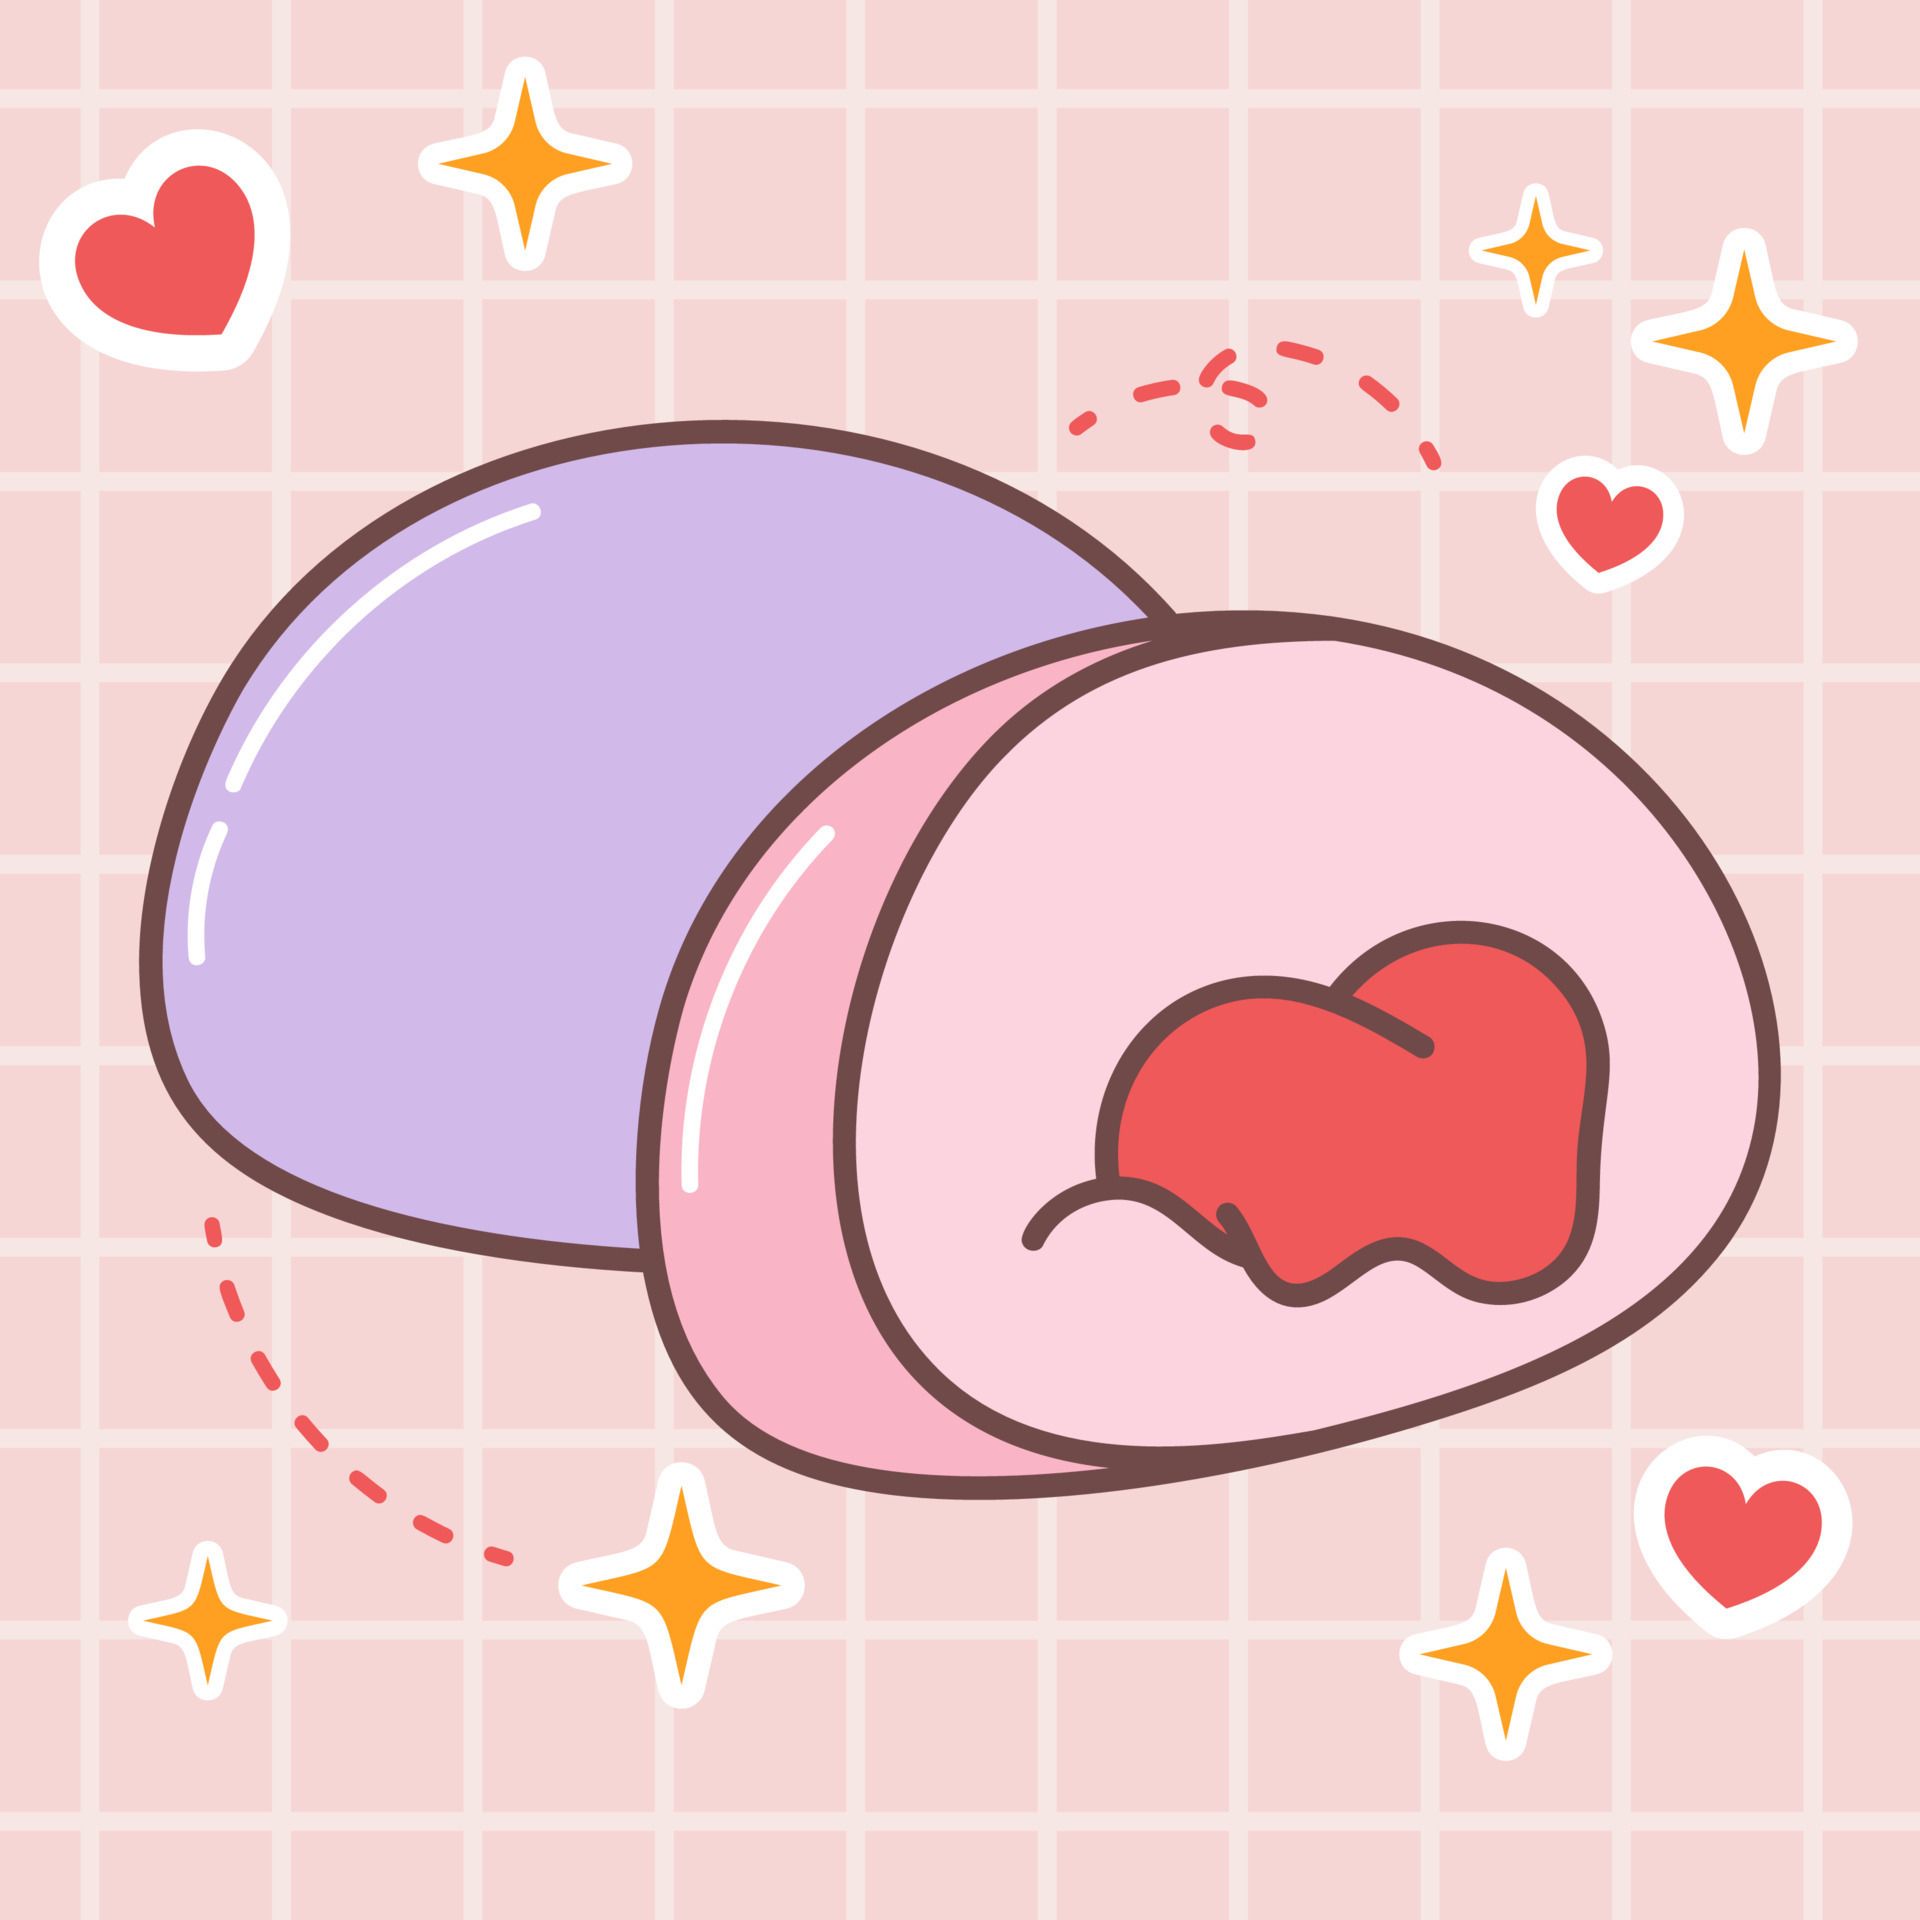 A sticker of two Japanese sweets, one pink and one purple, with a red bean paste filling. - Kawaii